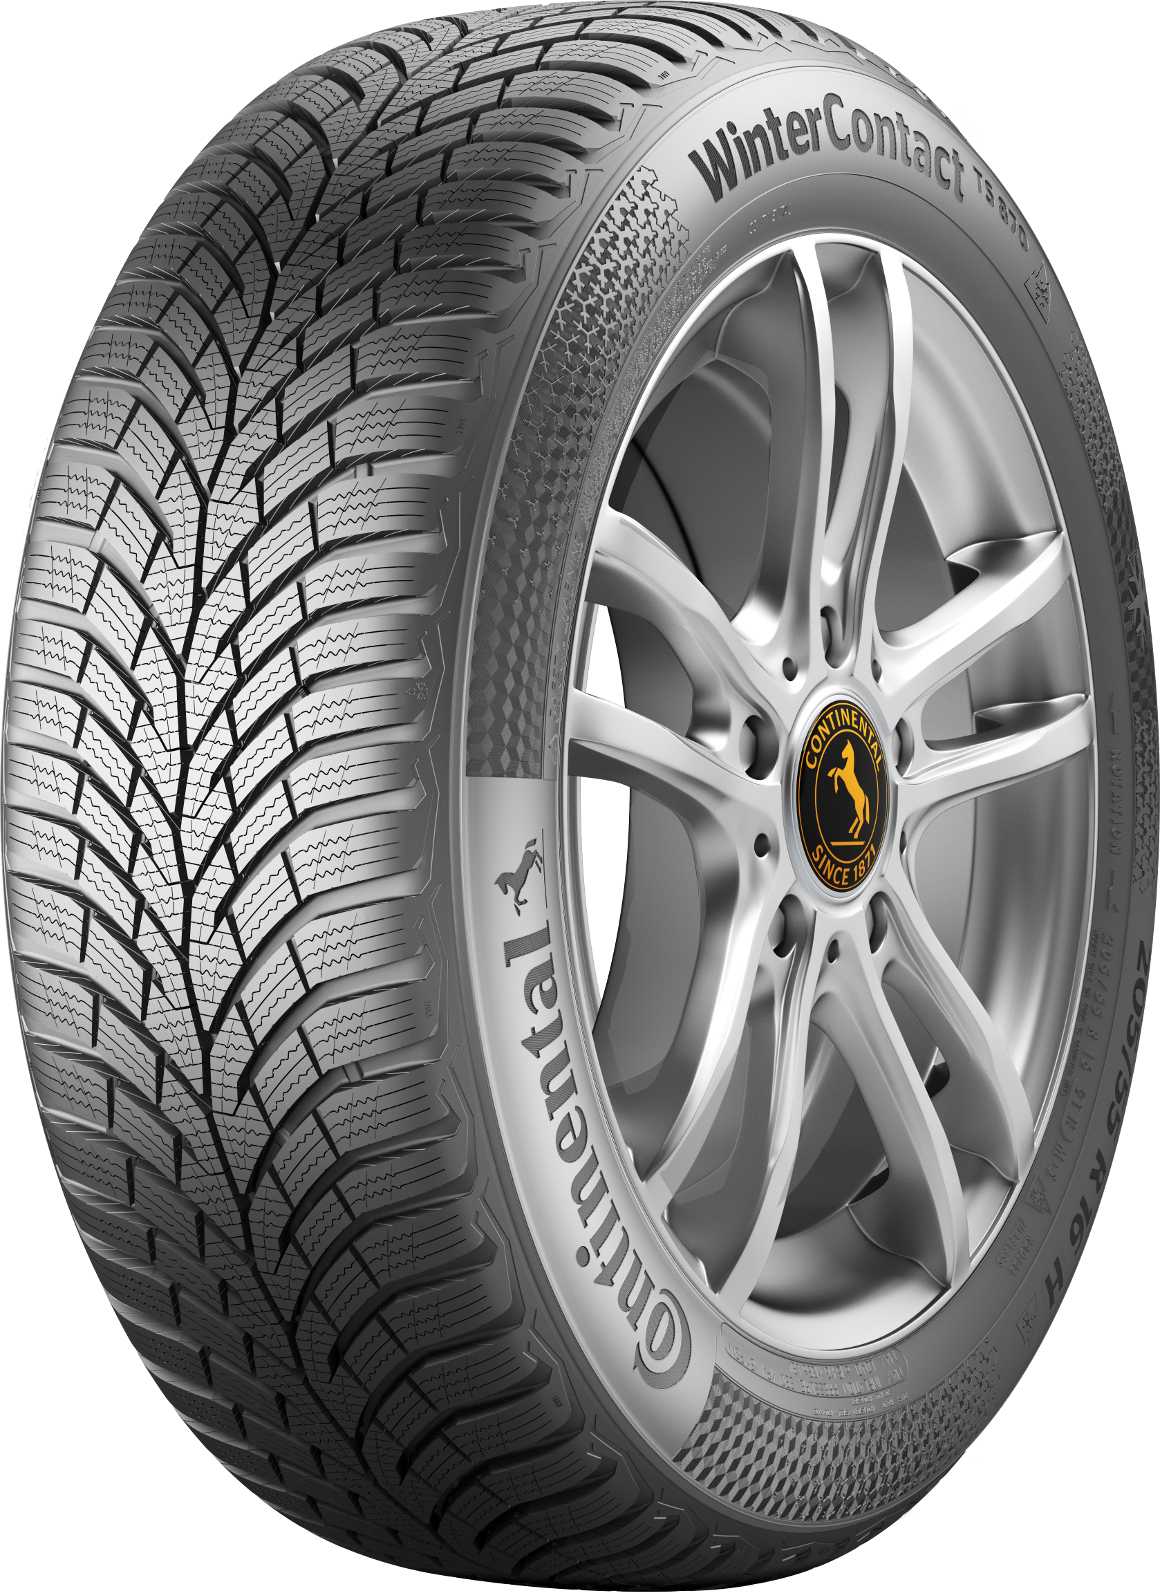    Continental Winter Contact TS870 175/65 R14 